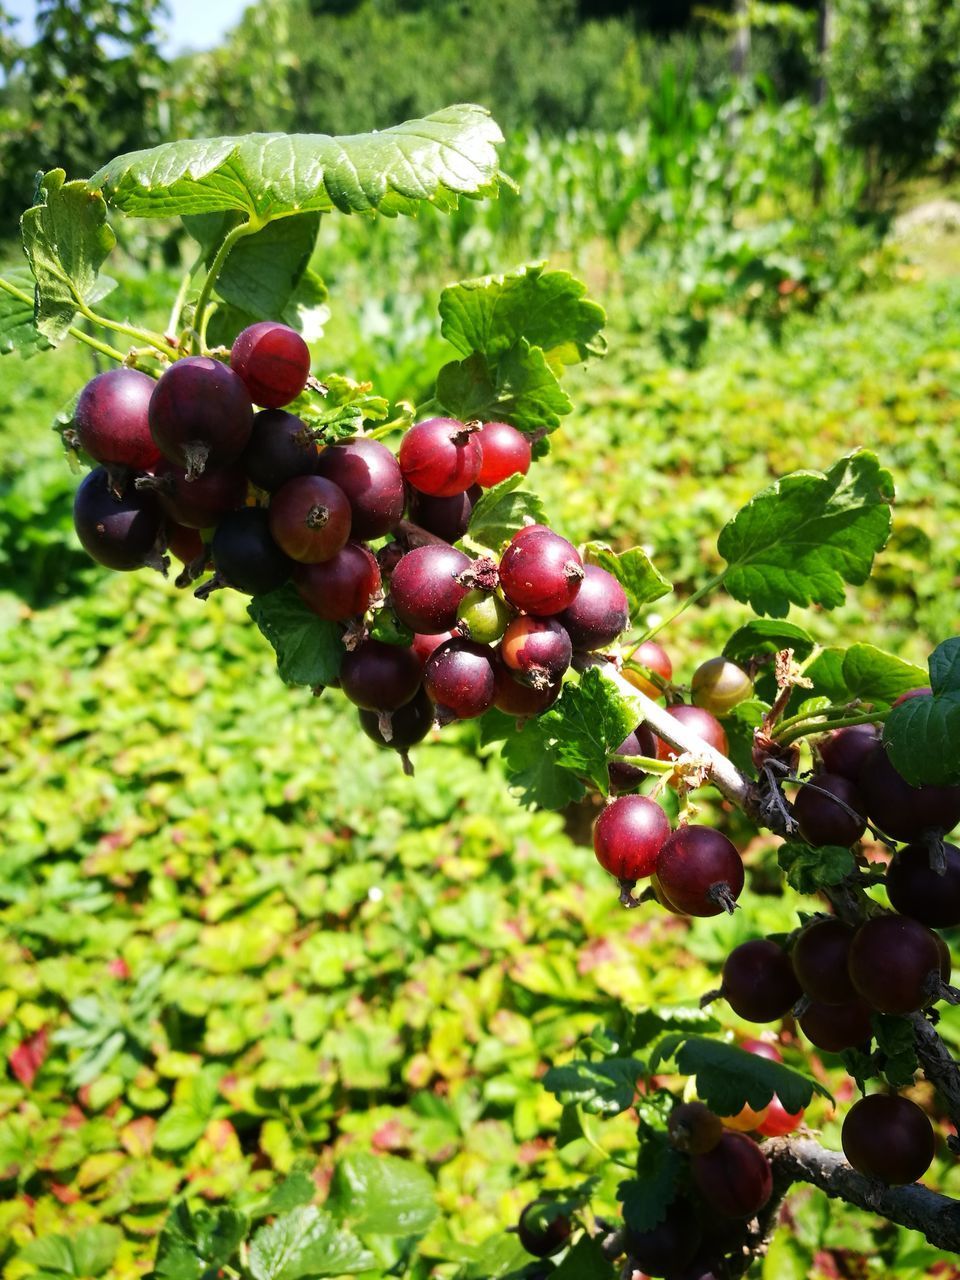 CLOSE-UP OF CHERRIES ON PLANT